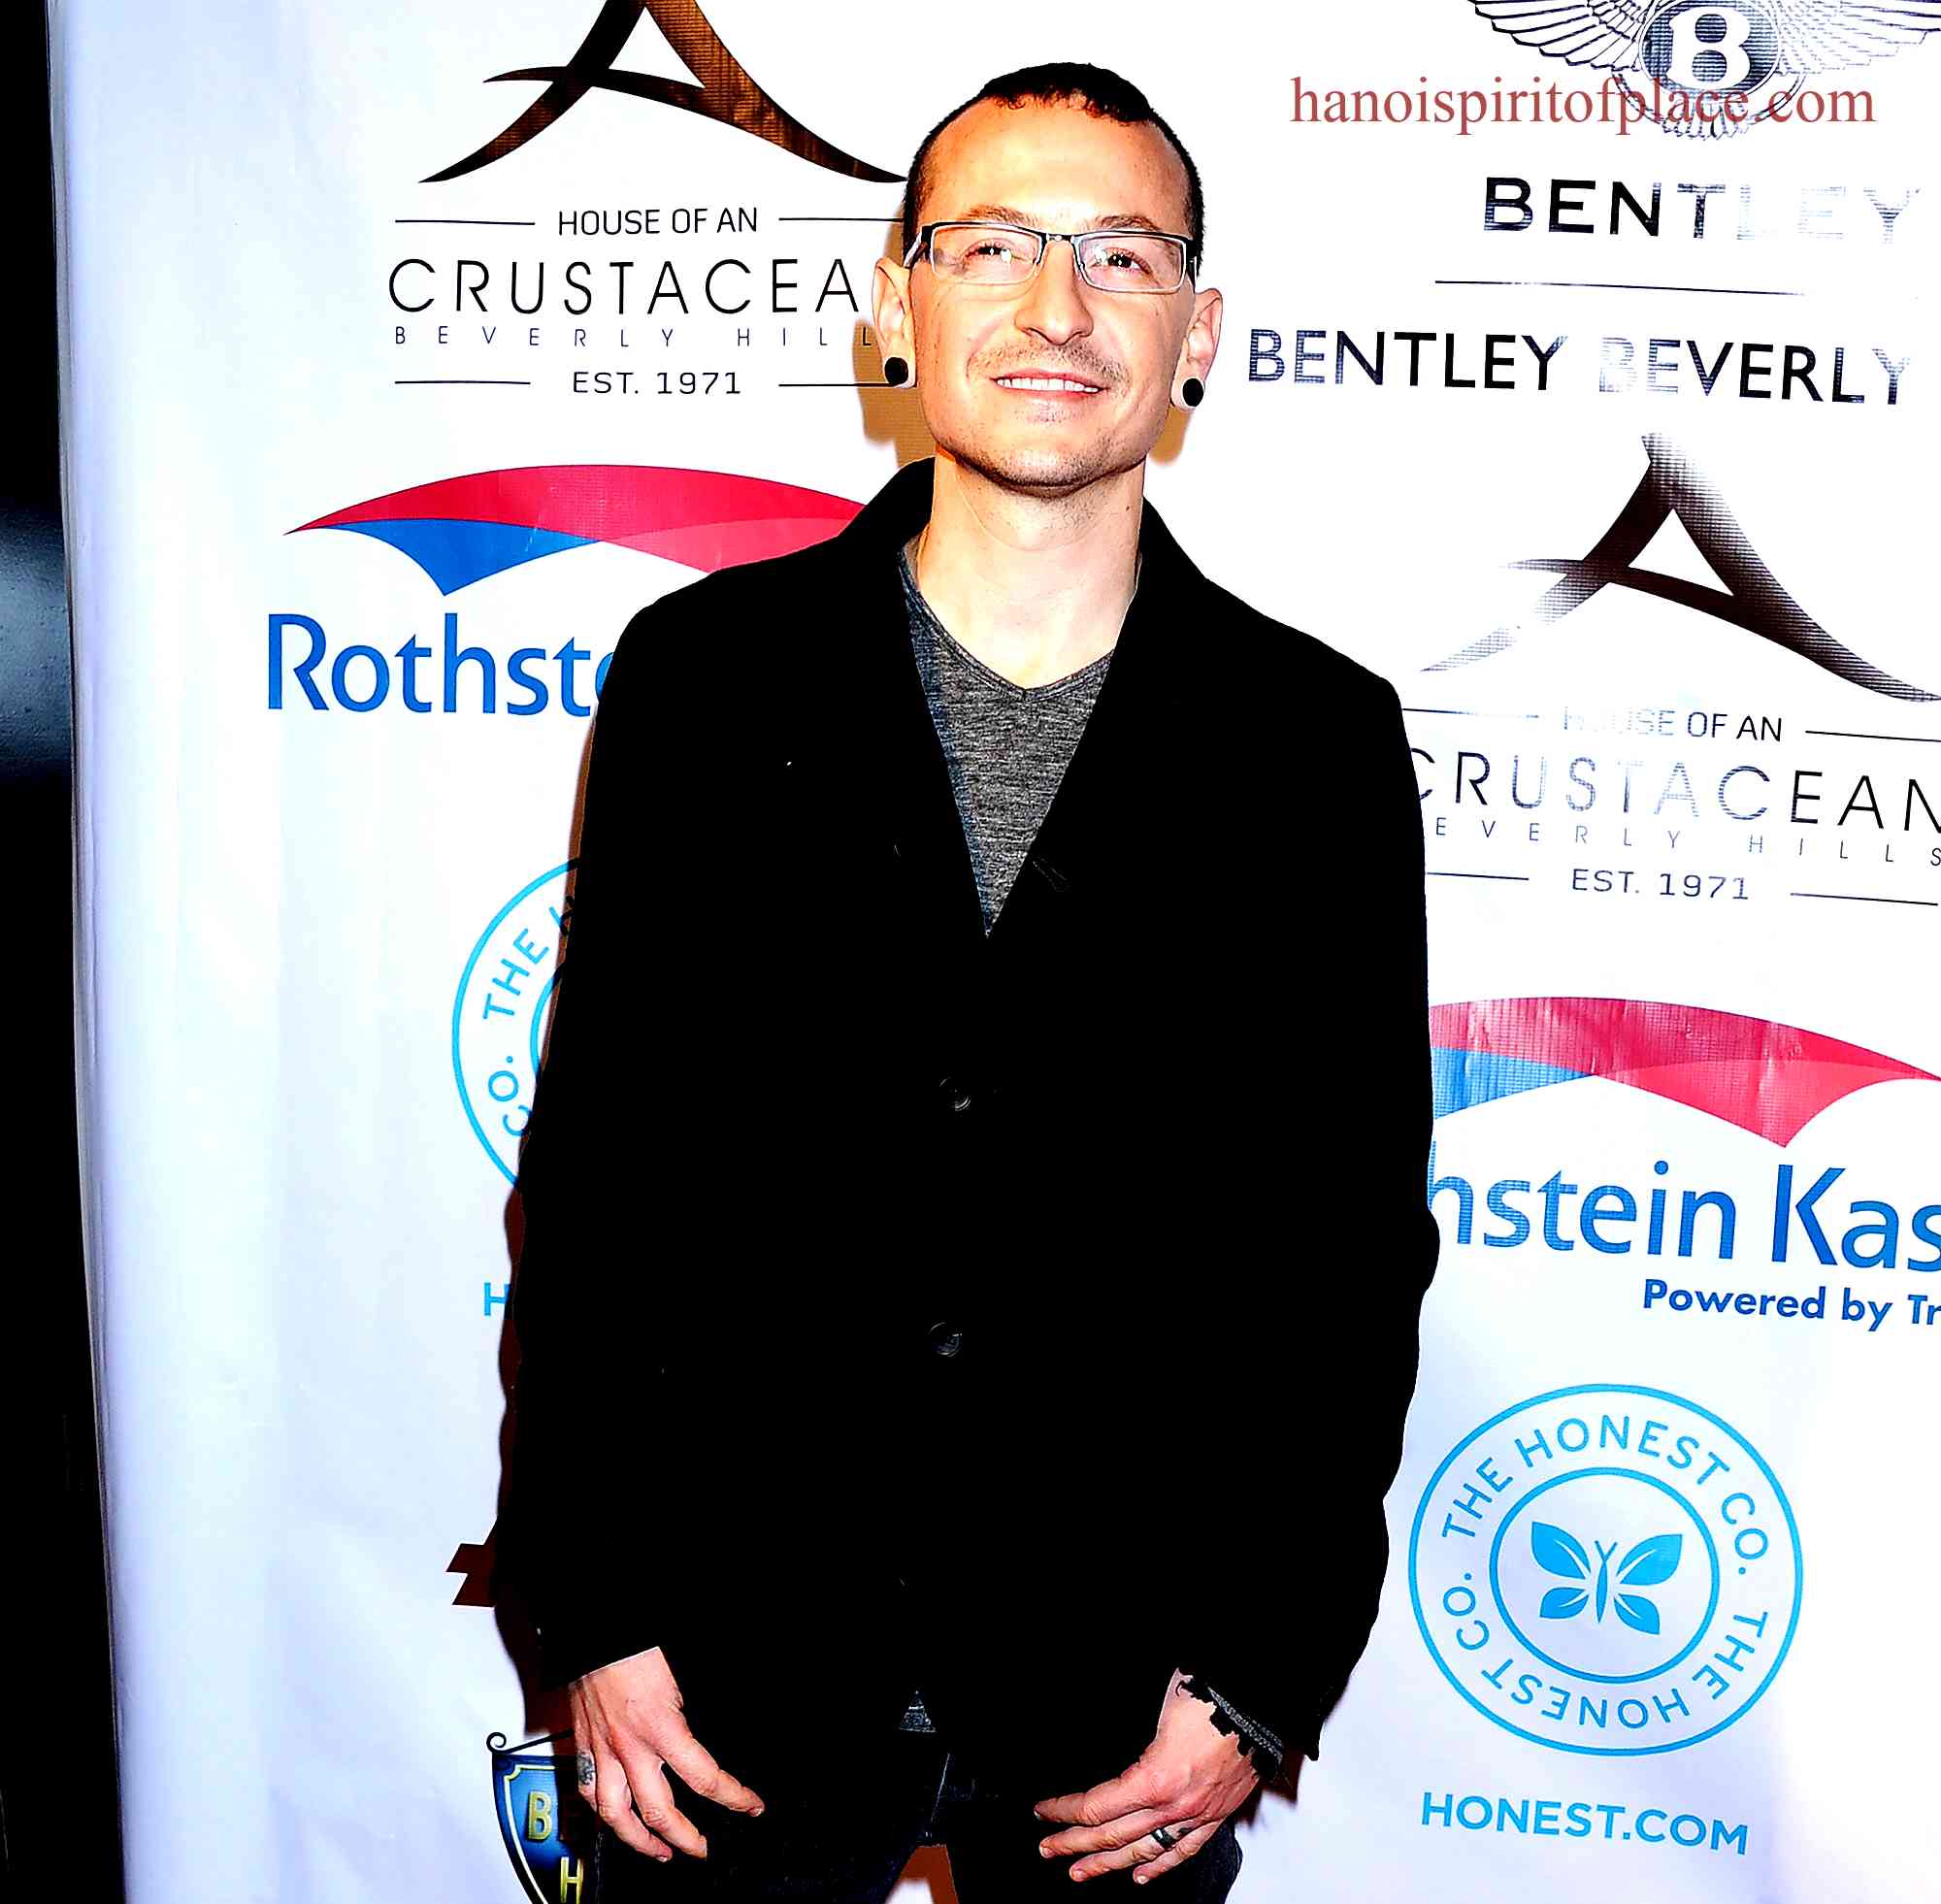 Brief overview of Chester Bennington's career and impact